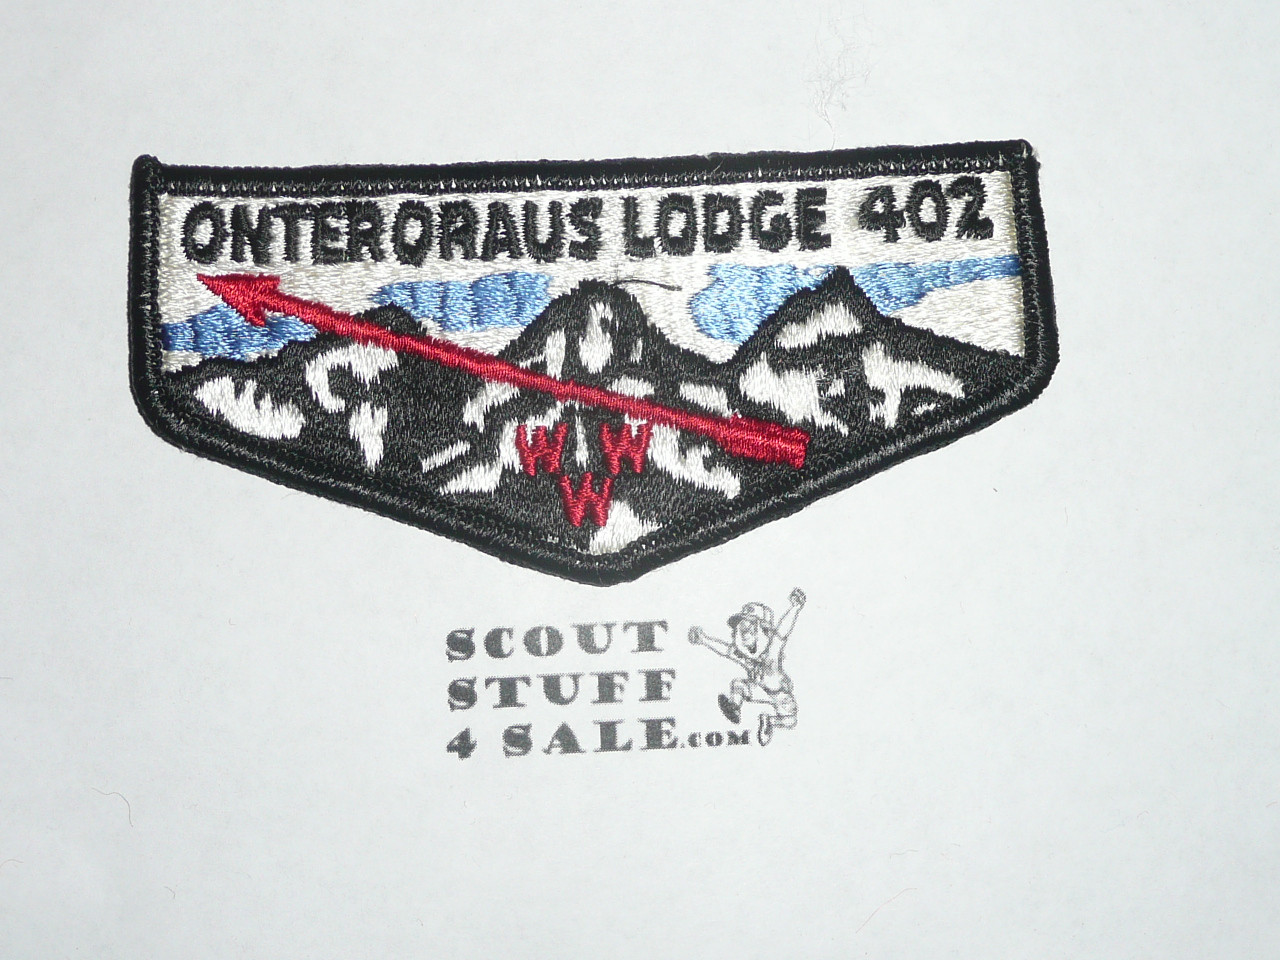 Order of the Arrow Lodge #402 Onteroraus s4 Flap Patch